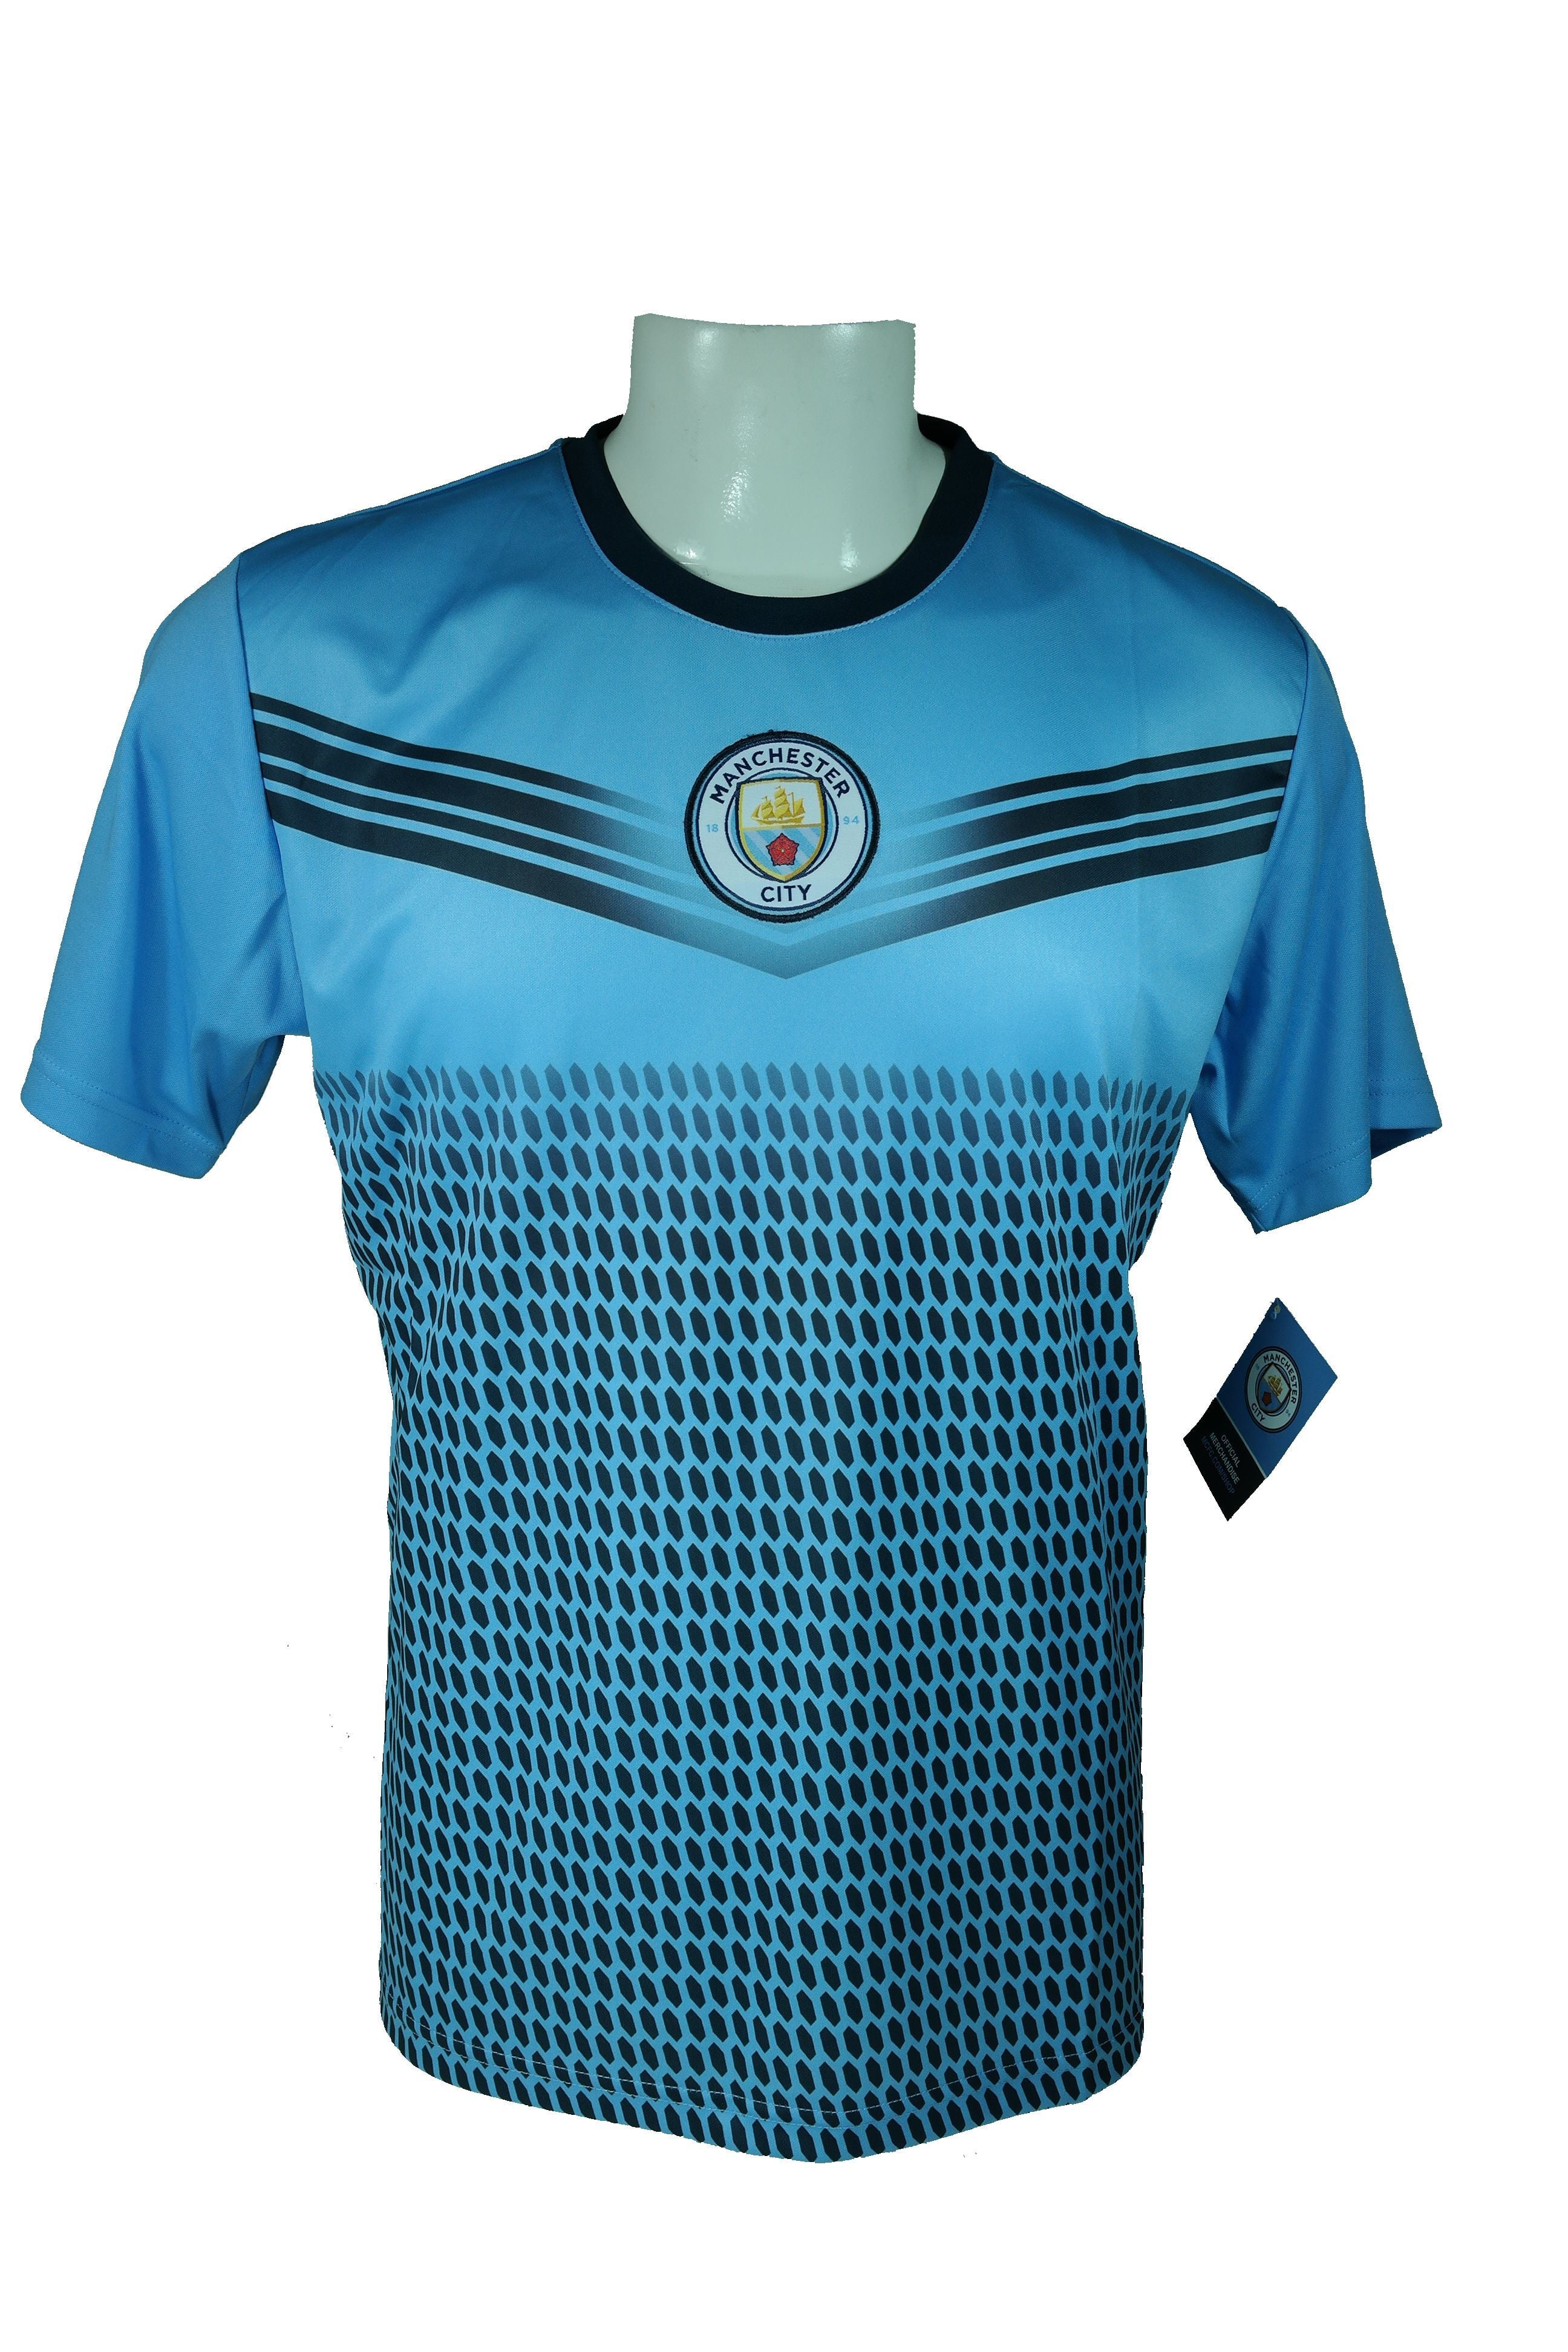 Soccer Official Adult  Poly Jersey J019 M Manchester City F.C 